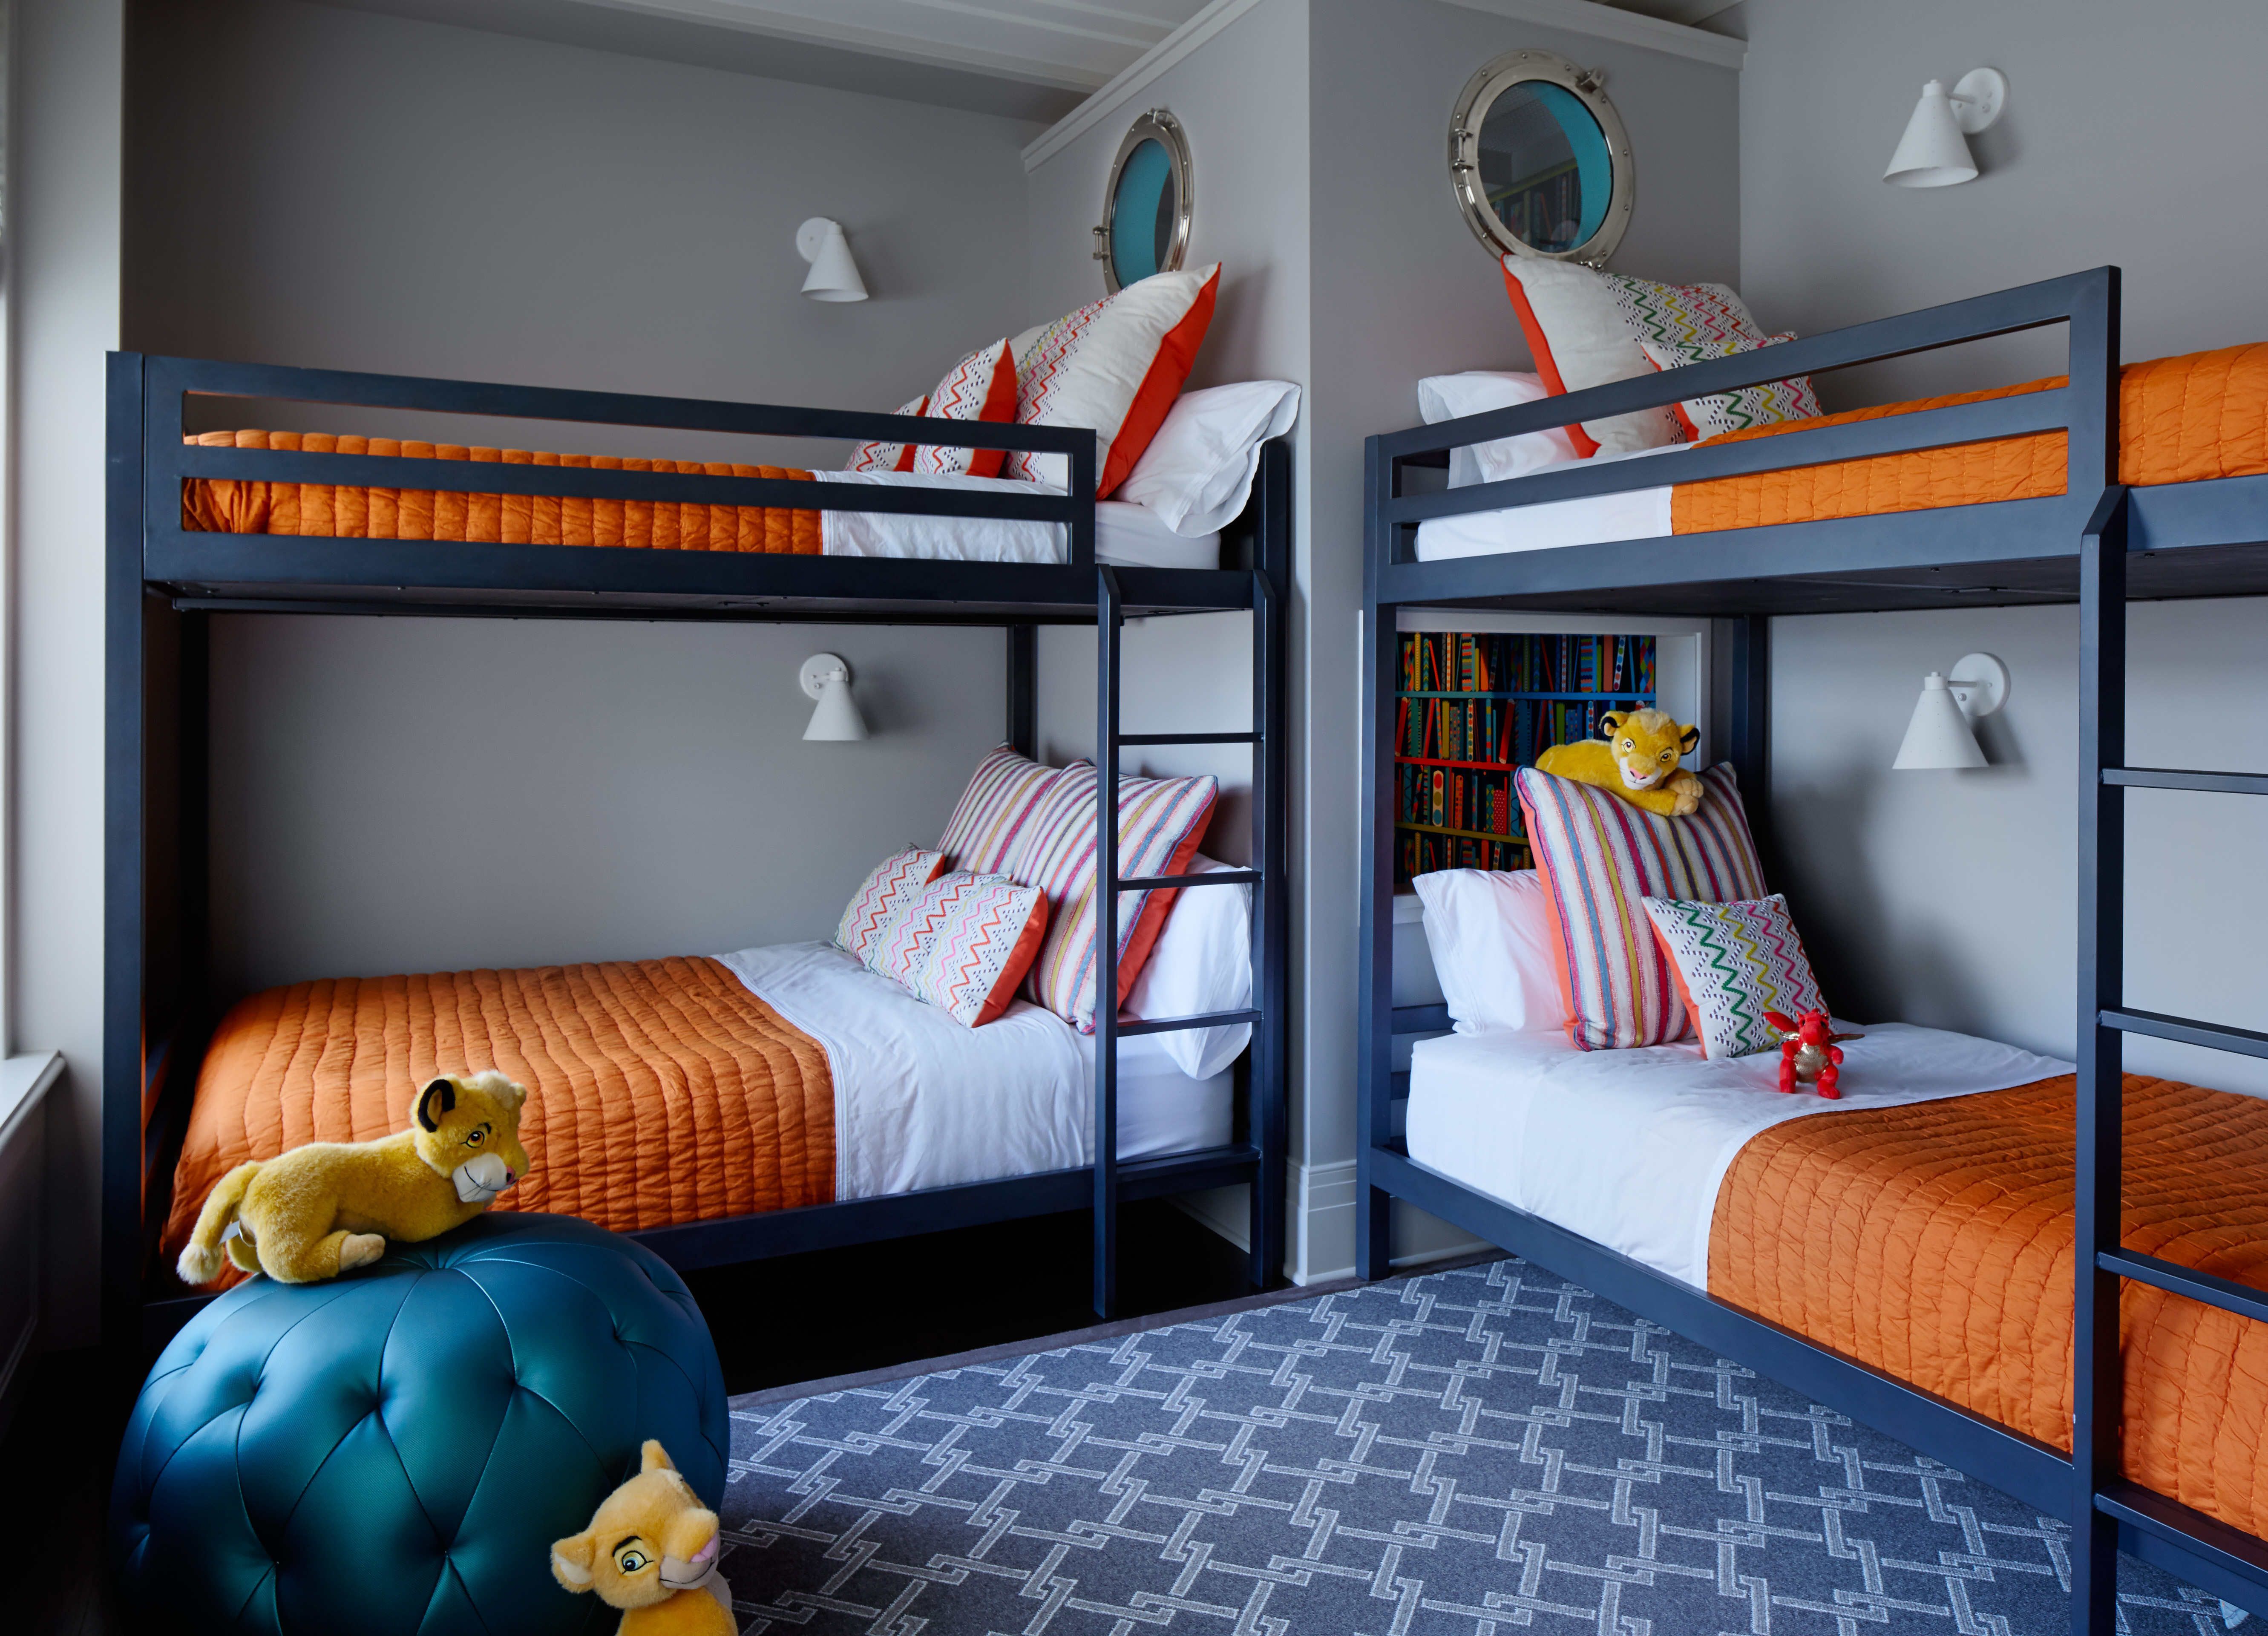 Bright Kids Bunk Room incorporating Double Bunk Beds with Orange Comofortors, and Teal Blue Pouf